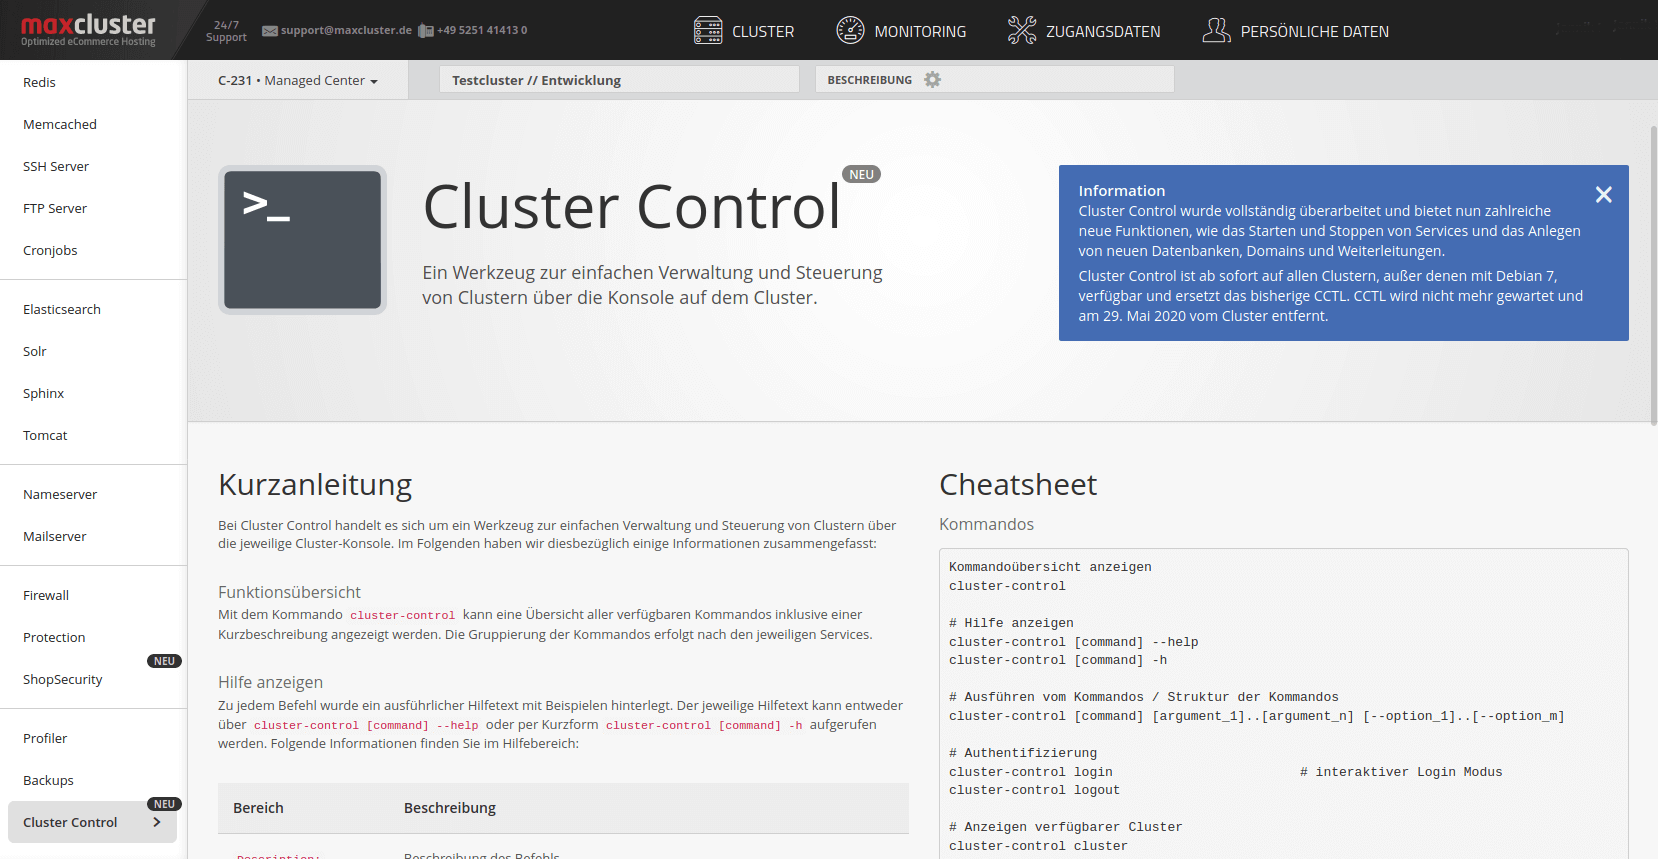 Cluster Control in the maxcluster Managed Center